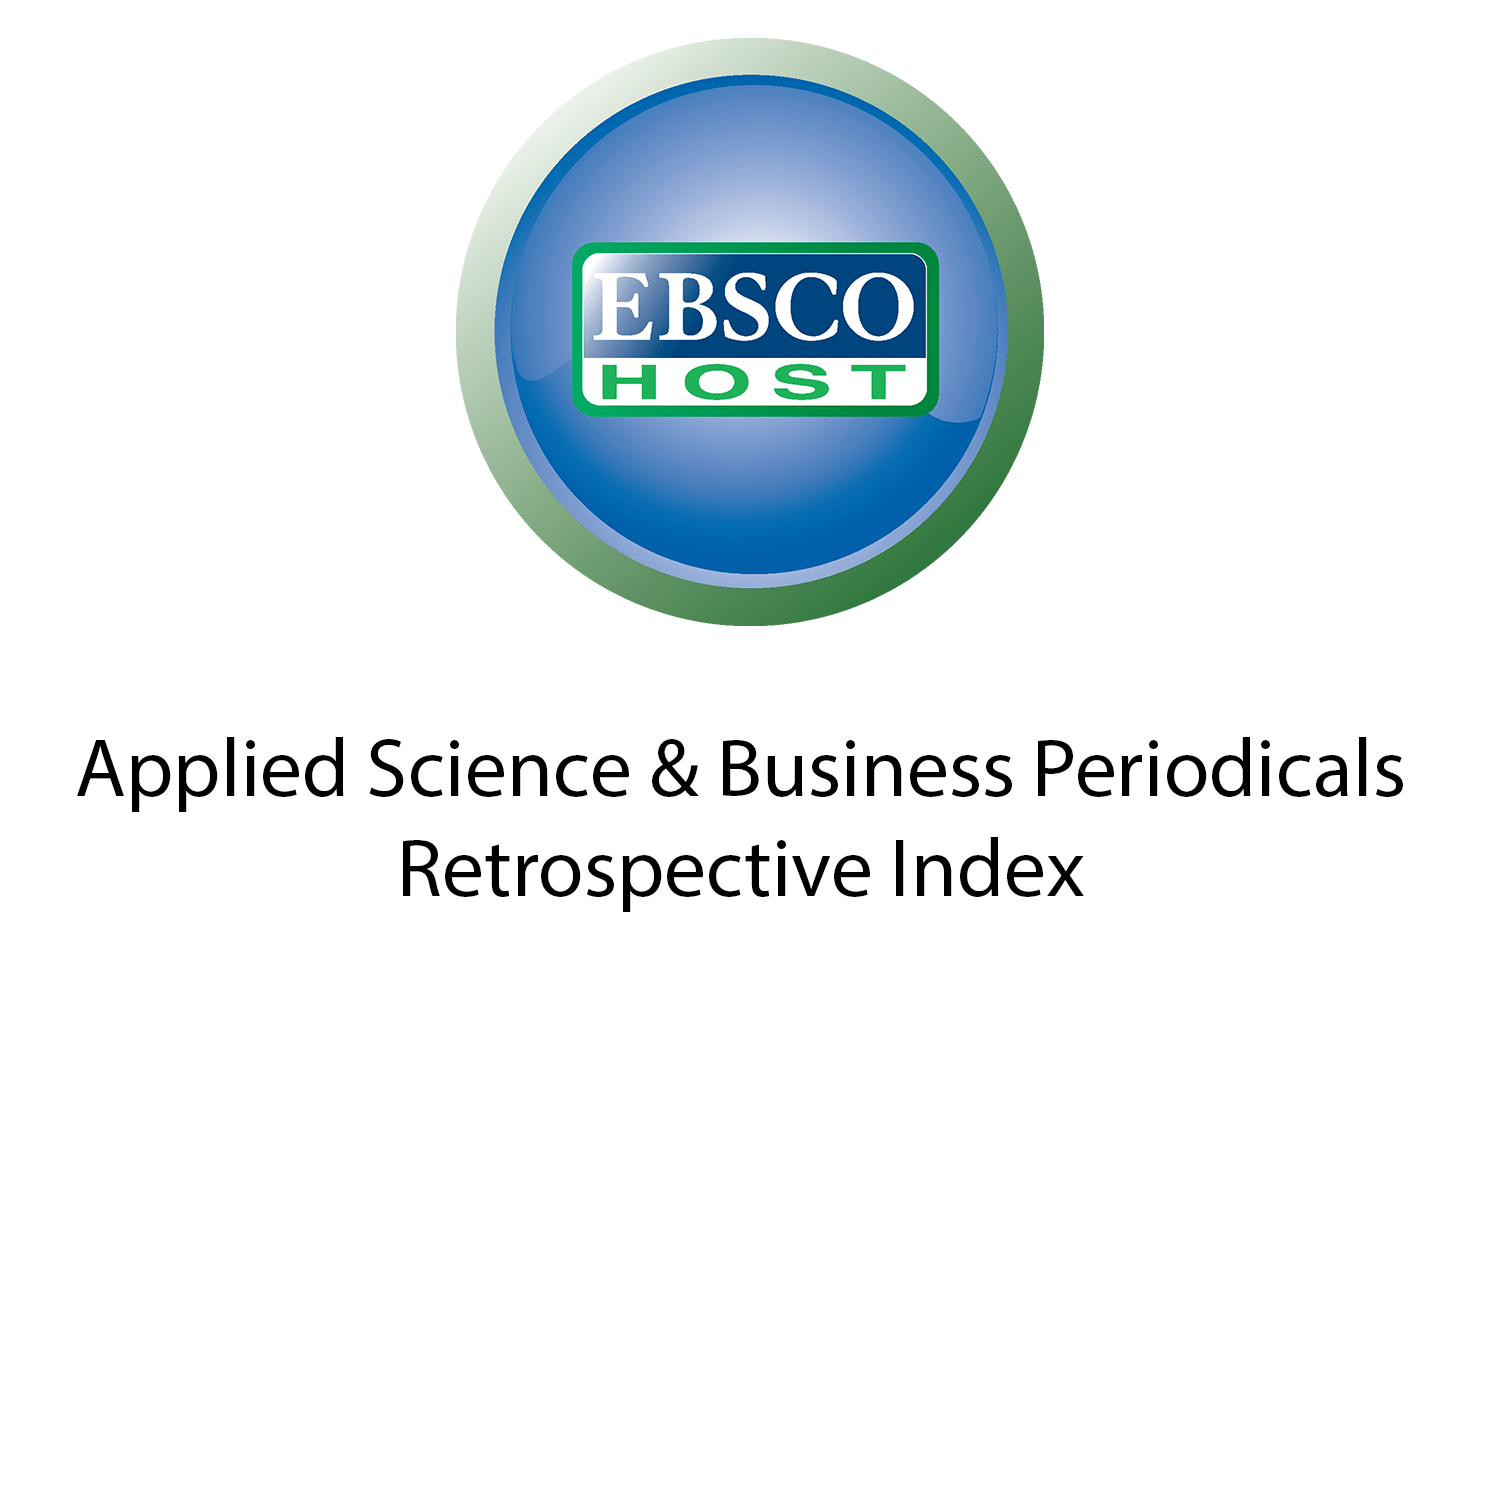 Applied Science & Business Periodicals Retrospective